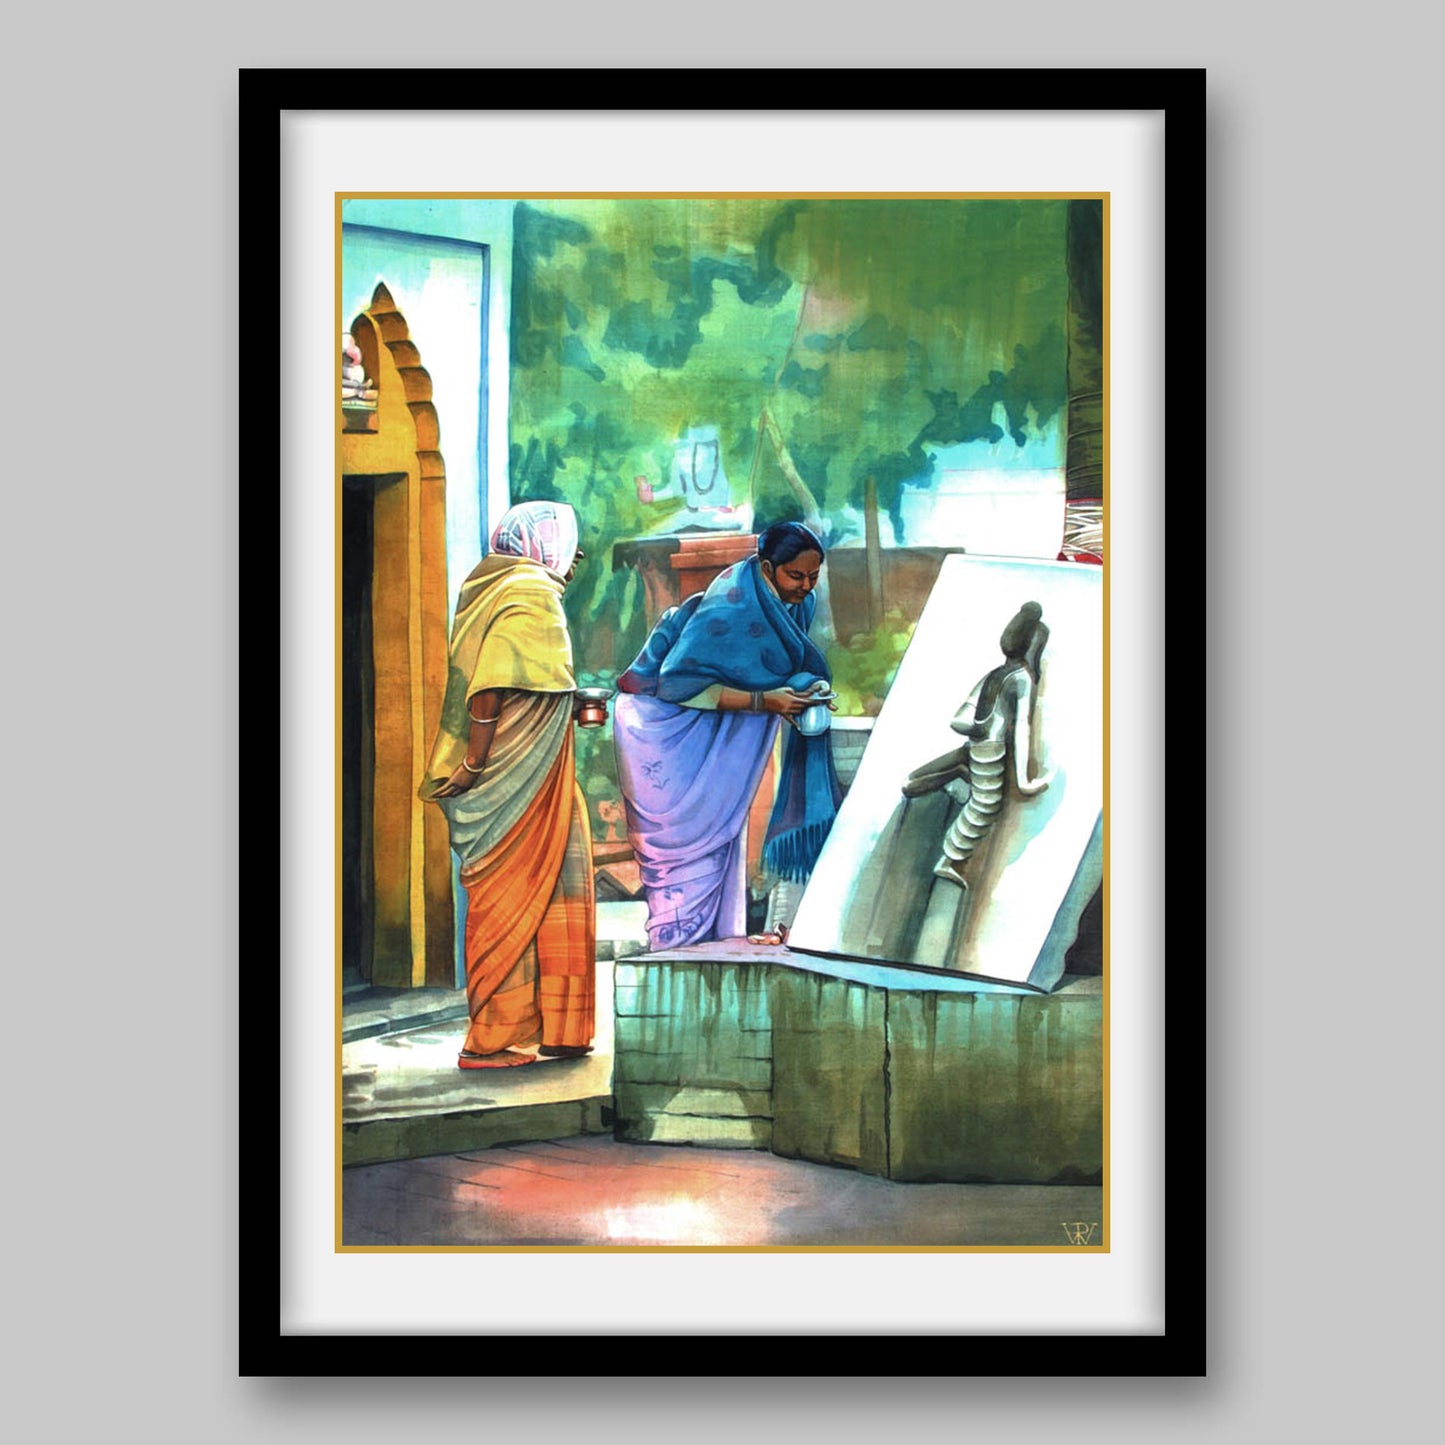 Women in Temple - High Quality Print of Artwork by Pieter Weltevrede